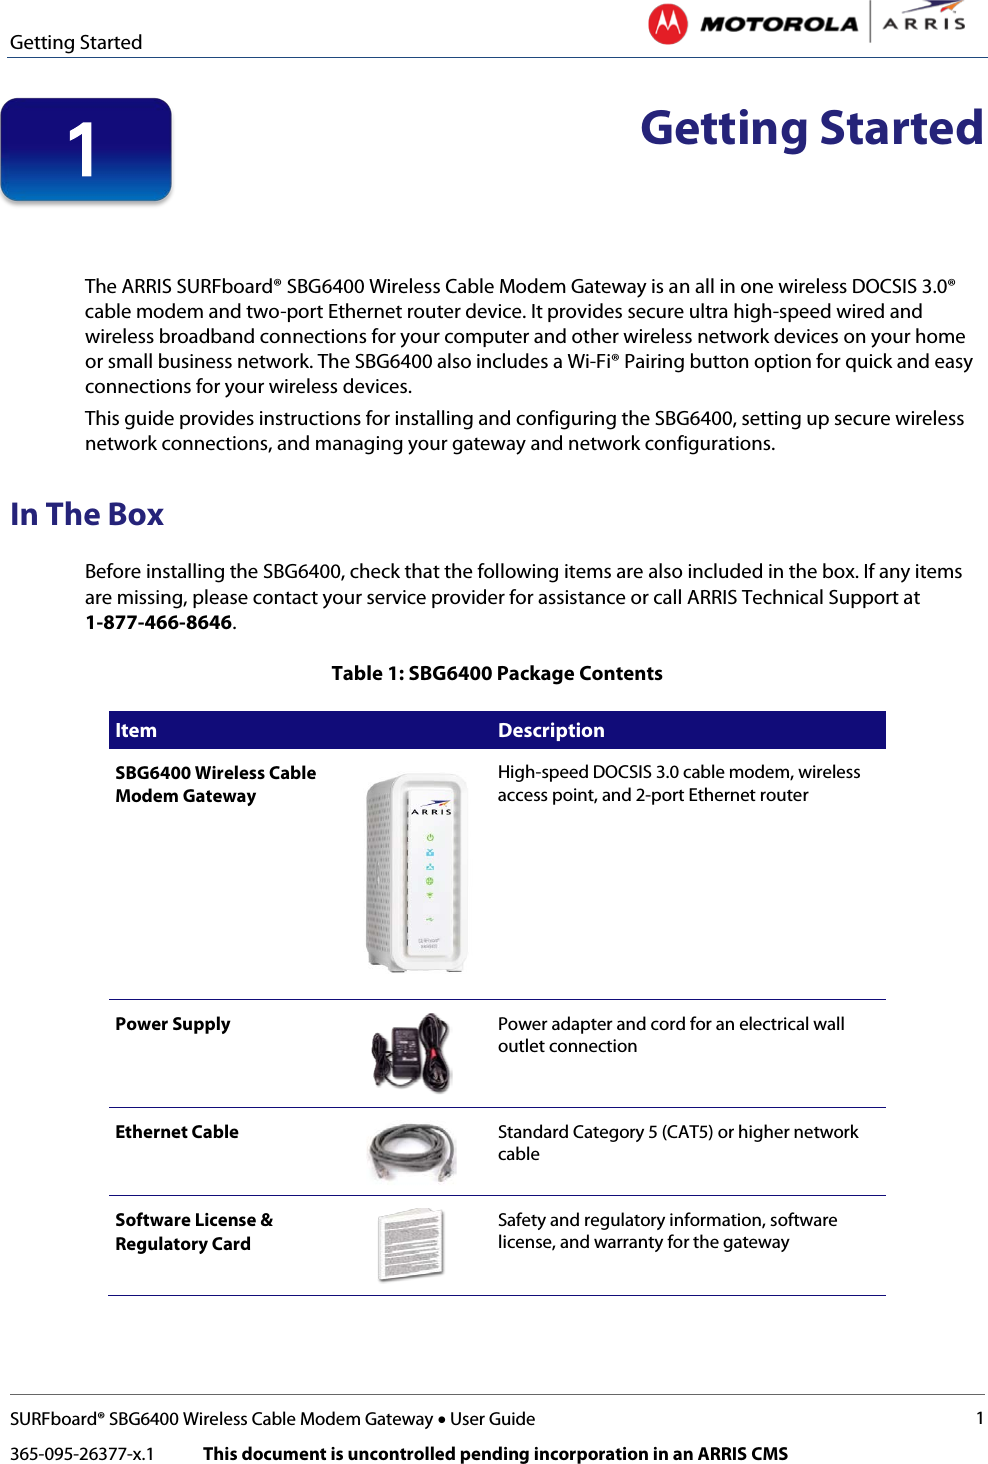 Getting Started   SURFboard® SBG6400 Wireless Cable Modem Gateway • User Guide 1 365-095-26377-x.1            This document is uncontrolled pending incorporation in an ARRIS CMS   Getting Started   The ARRIS SURFboard® SBG6400 Wireless Cable Modem Gateway is an all in one wireless DOCSIS 3.0® cable modem and two-port Ethernet router device. It provides secure ultra high-speed wired and wireless broadband connections for your computer and other wireless network devices on your home or small business network. The SBG6400 also includes a Wi-Fi® Pairing button option for quick and easy connections for your wireless devices. This guide provides instructions for installing and configuring the SBG6400, setting up secure wireless network connections, and managing your gateway and network configurations. In The Box Before installing the SBG6400, check that the following items are also included in the box. If any items are missing, please contact your service provider for assistance or call ARRIS Technical Support at 1-877-466-8646. Table 1: SBG6400 Package Contents Item  Description SBG6400 Wireless Cable Modem Gateway  High-speed DOCSIS 3.0 cable modem, wireless access point, and 2-port Ethernet router Power Supply  Power adapter and cord for an electrical wall outlet connection Ethernet Cable  Standard Category 5 (CAT5) or higher network cable Software License &amp; Regulatory Card  Safety and regulatory information, software license, and warranty for the gateway 1 